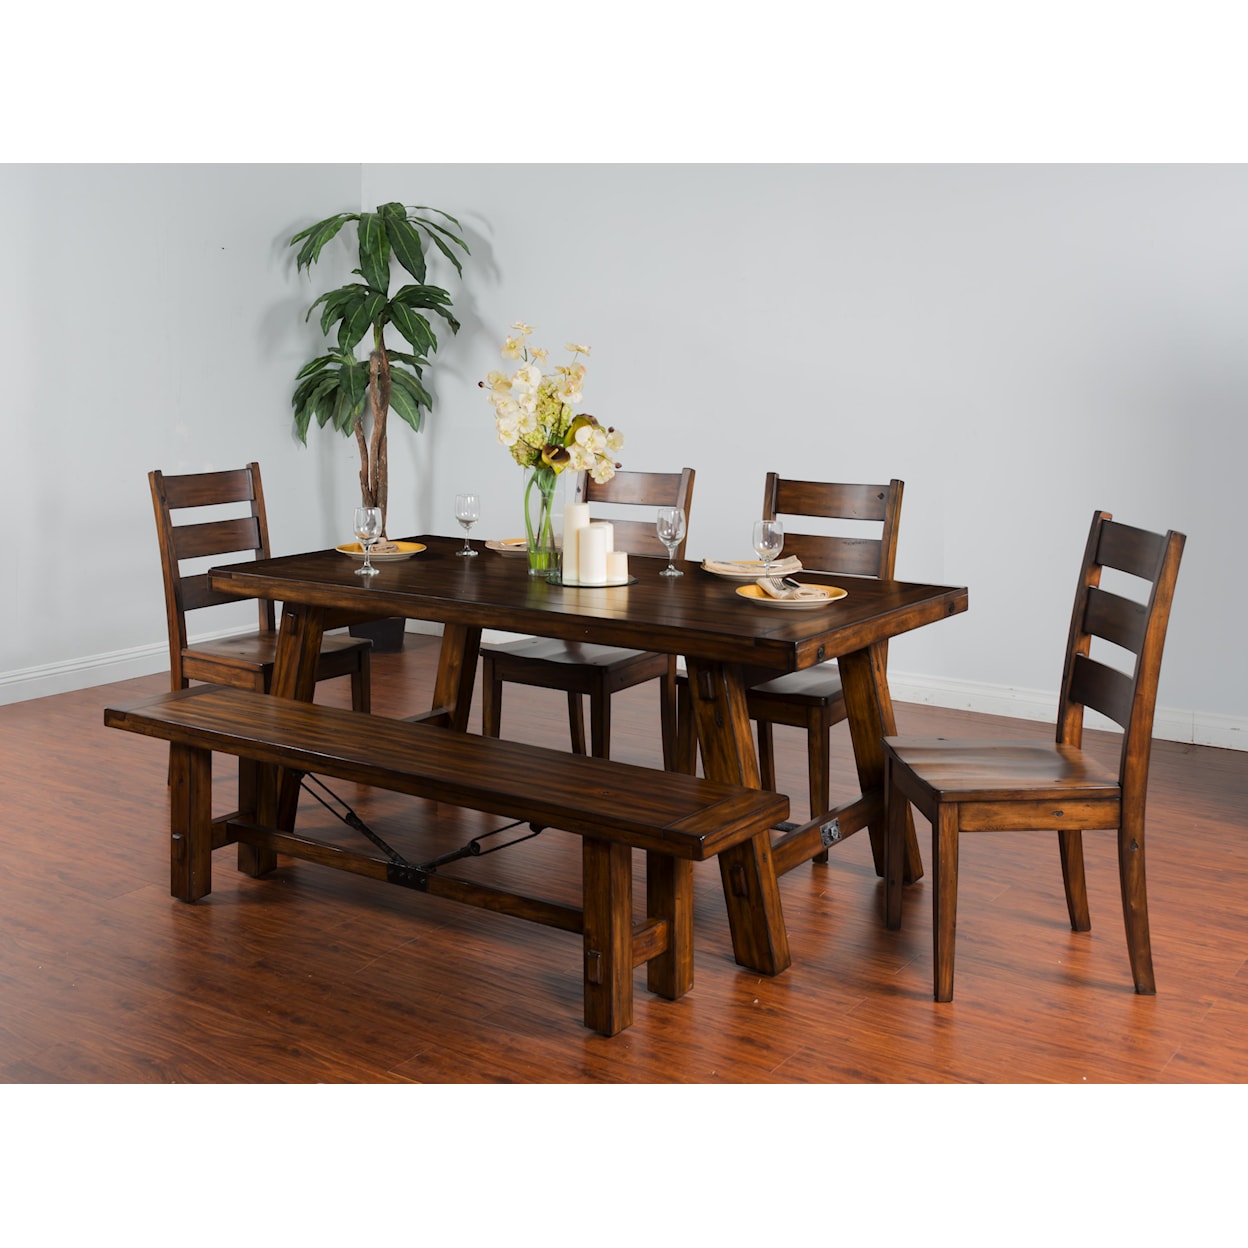 Sunny Designs Tuscany Extension Table w/ Turnbuckle